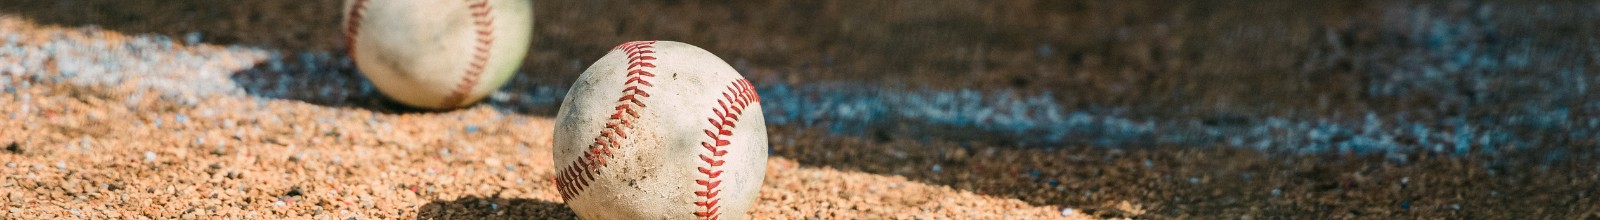 A baseball in the dirt on a sunny day